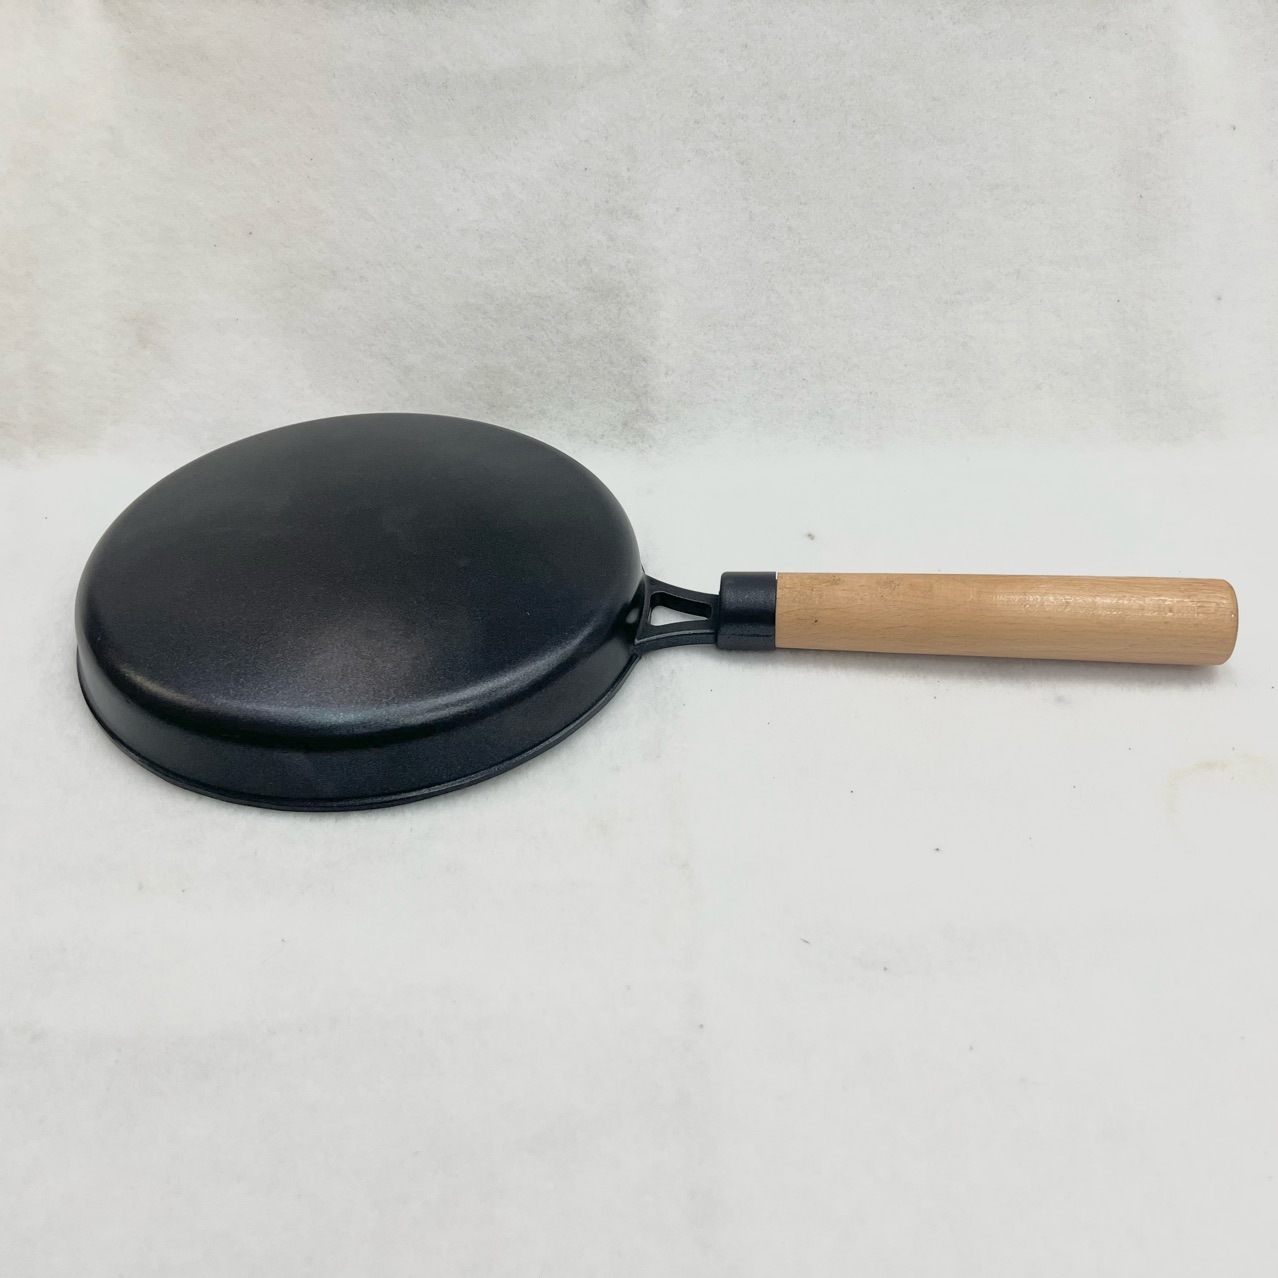 Amazon Pancake Maker Kitchen Household Wooden Handle Egg Frying Pan Southeast Asia Exclusive for Non-Stick Pancake Maker Foreign Trade Export